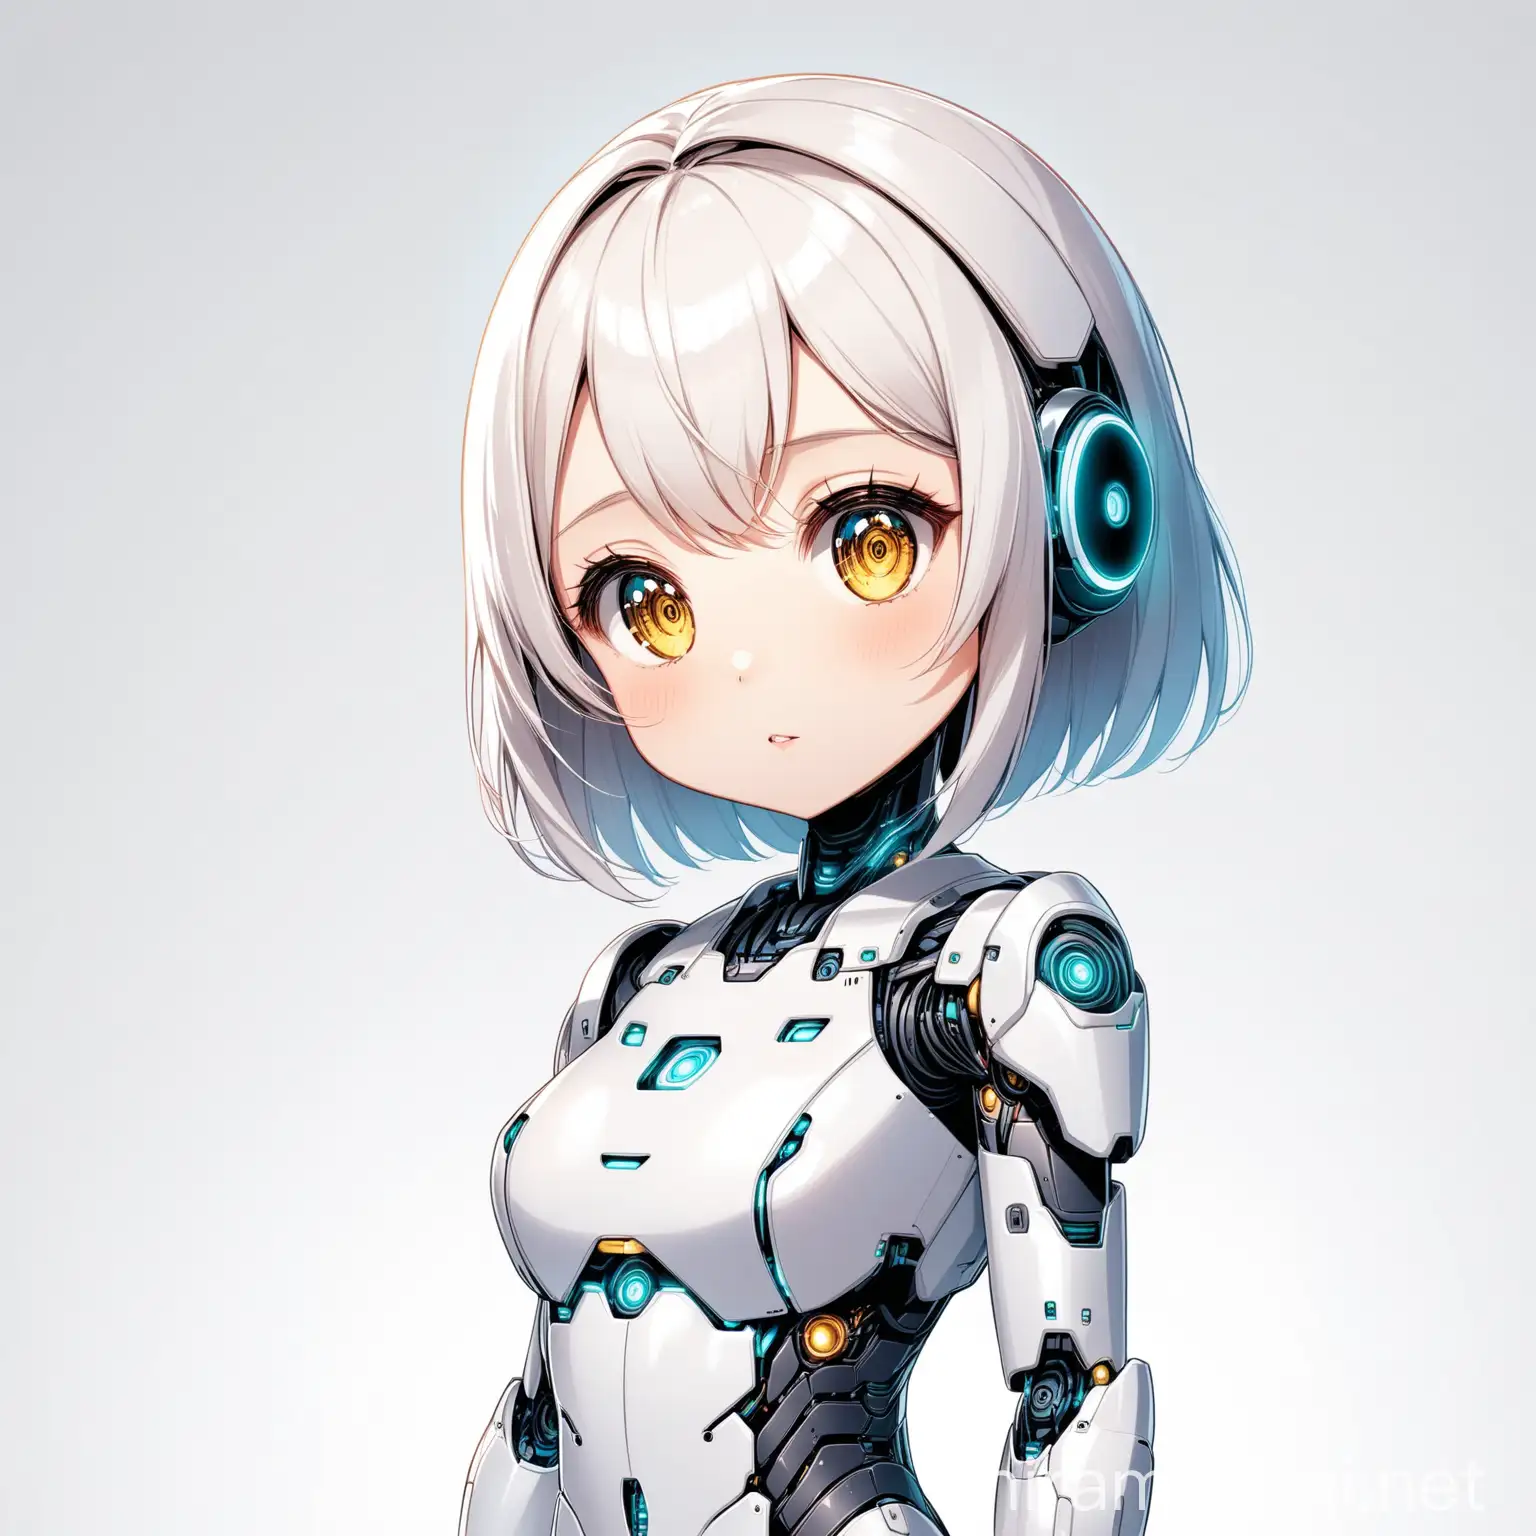 Adorable Girl Robot Poses on Clean White Background